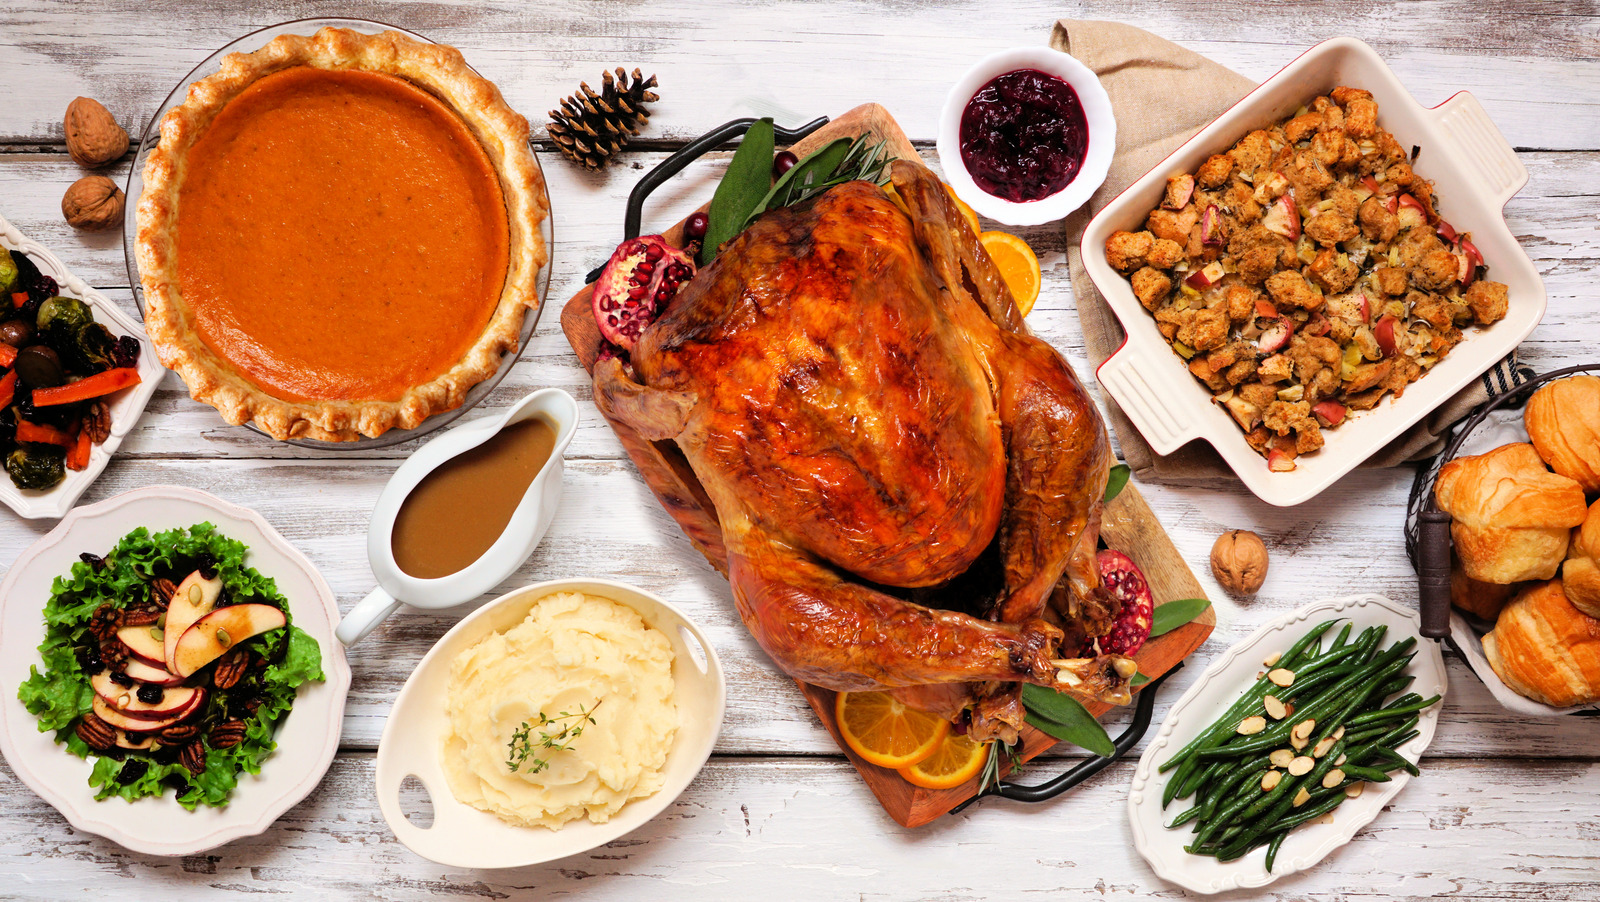 25 Agree This Is The Best Place To Order A Thanksgiving Dinner For